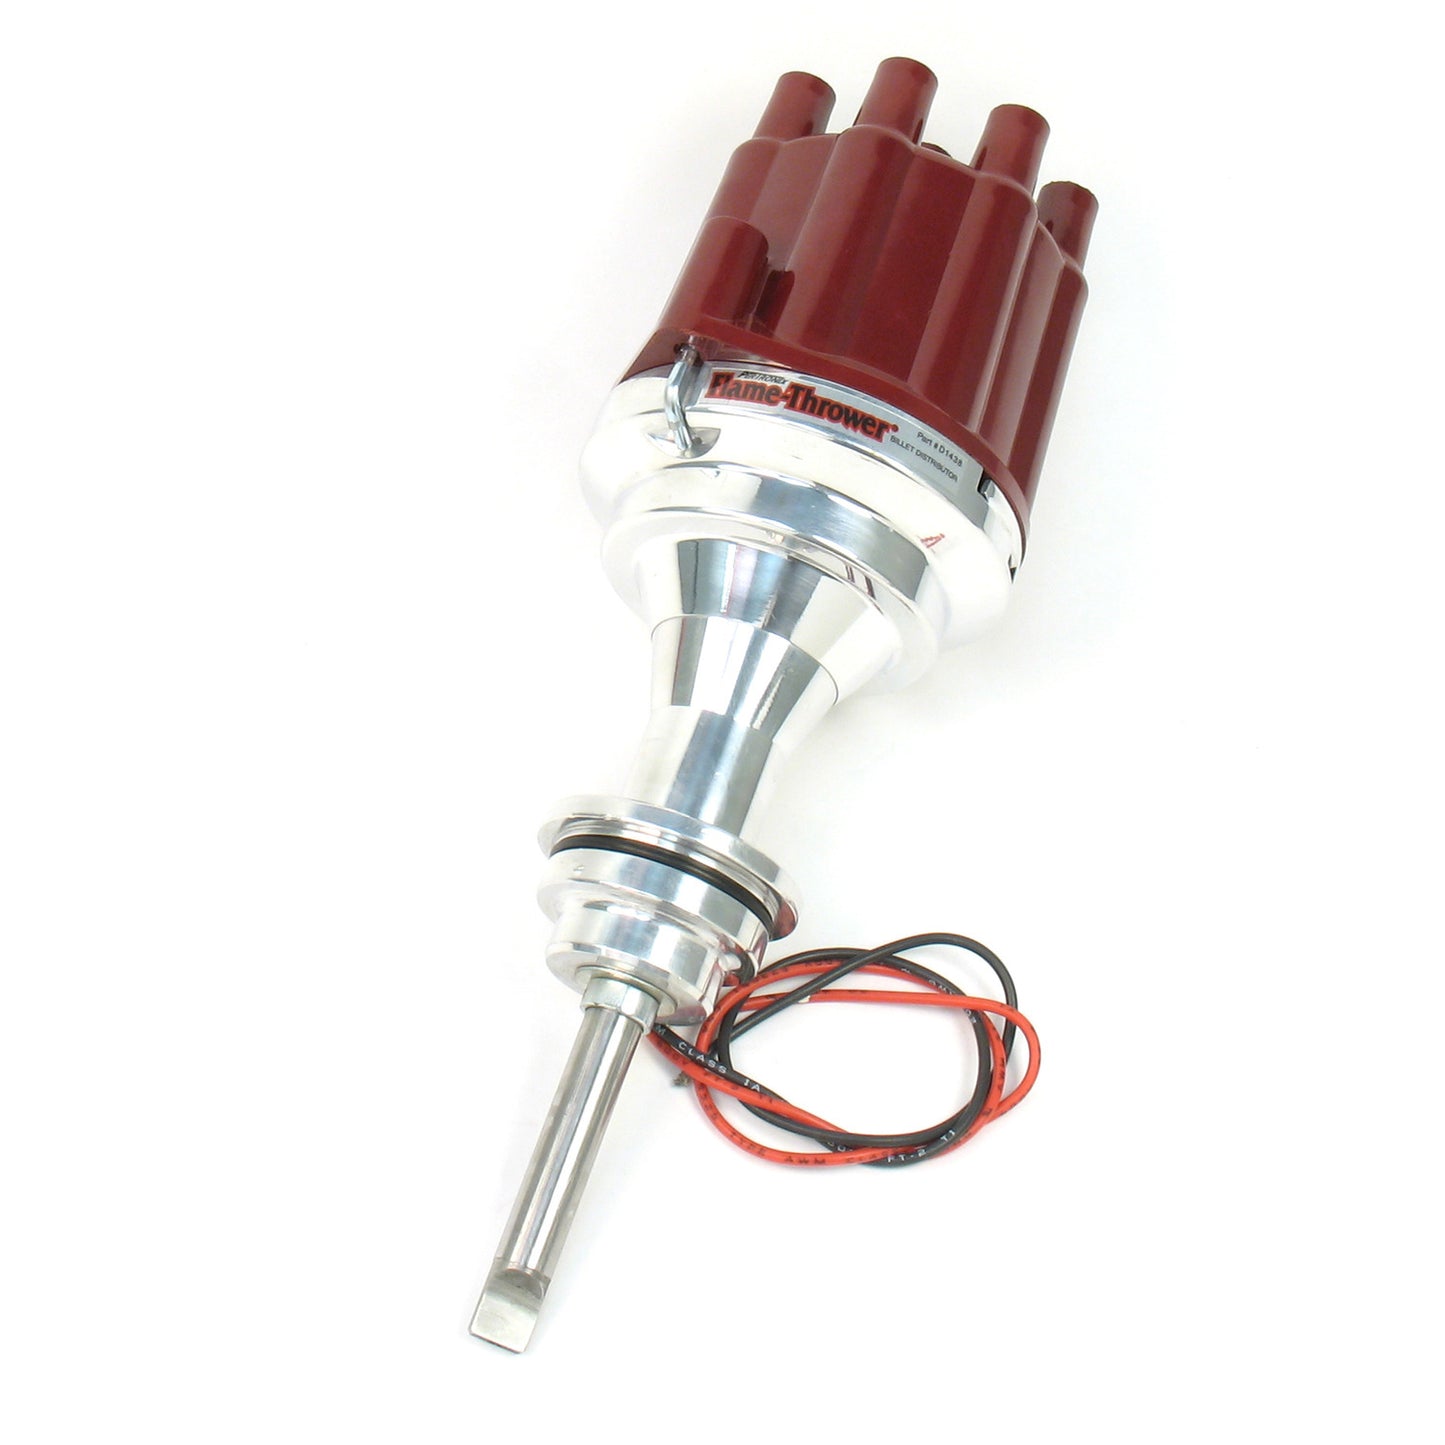 PerTronix D7143801 Flame-Thrower Electronic Distributor Billet Chrysler/Dodge/Plymouth 426-440 with Ignitor III Non Vacuum Red caI